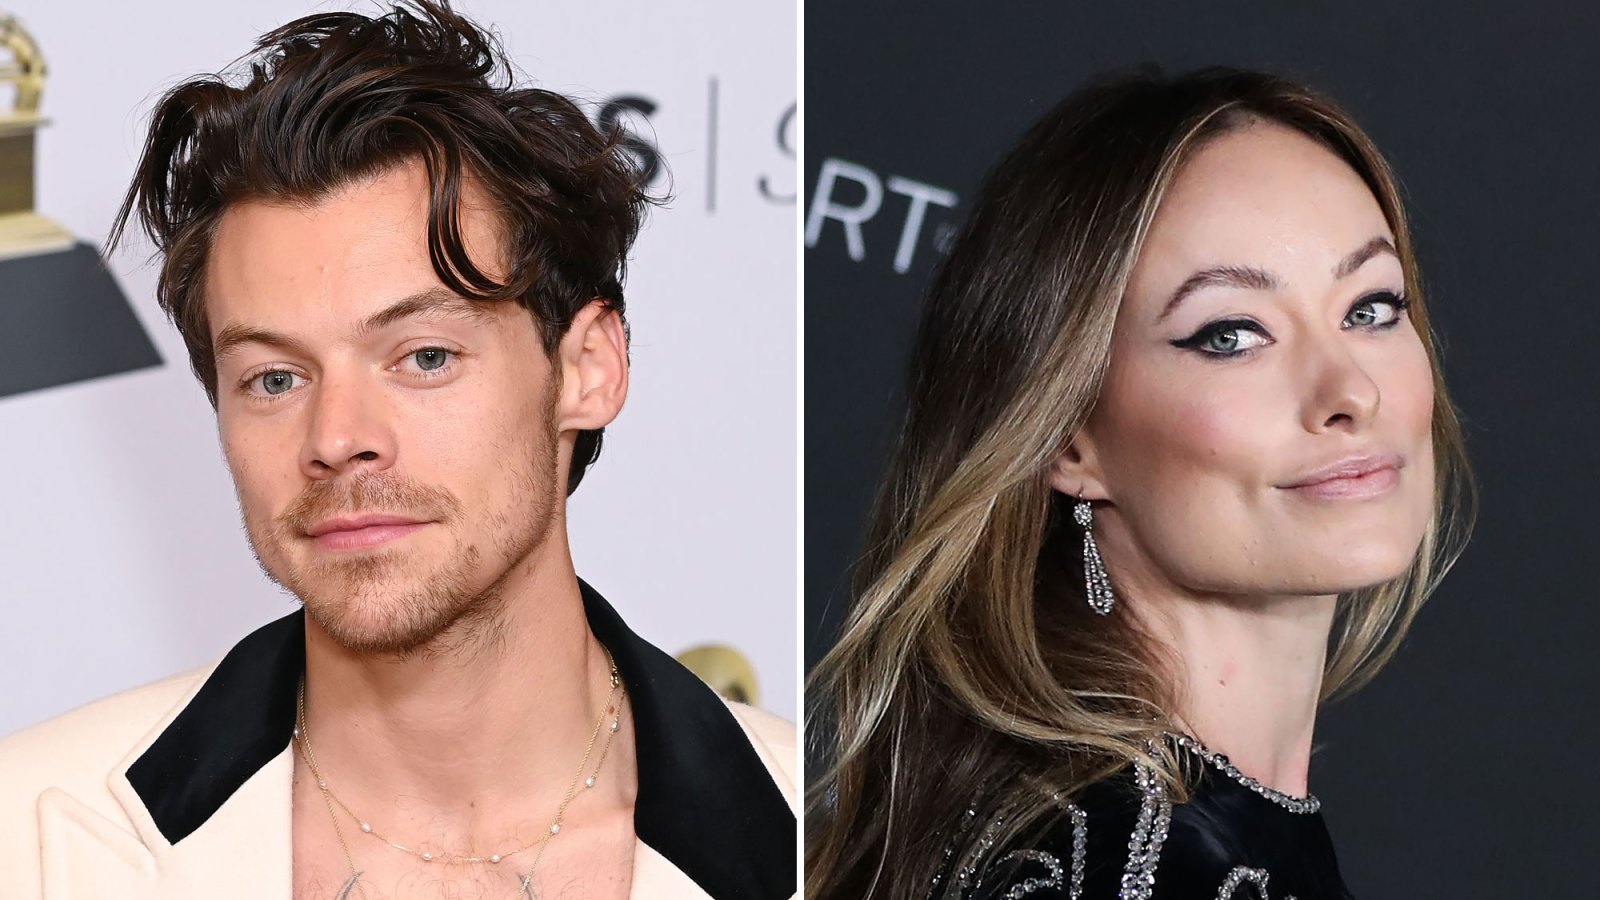 'Selling Sunset' Season 6 Features Joke About Harry Styles and Olivia Wilde's Sex Life: 'It Definitely Got a Little Wild in Here'